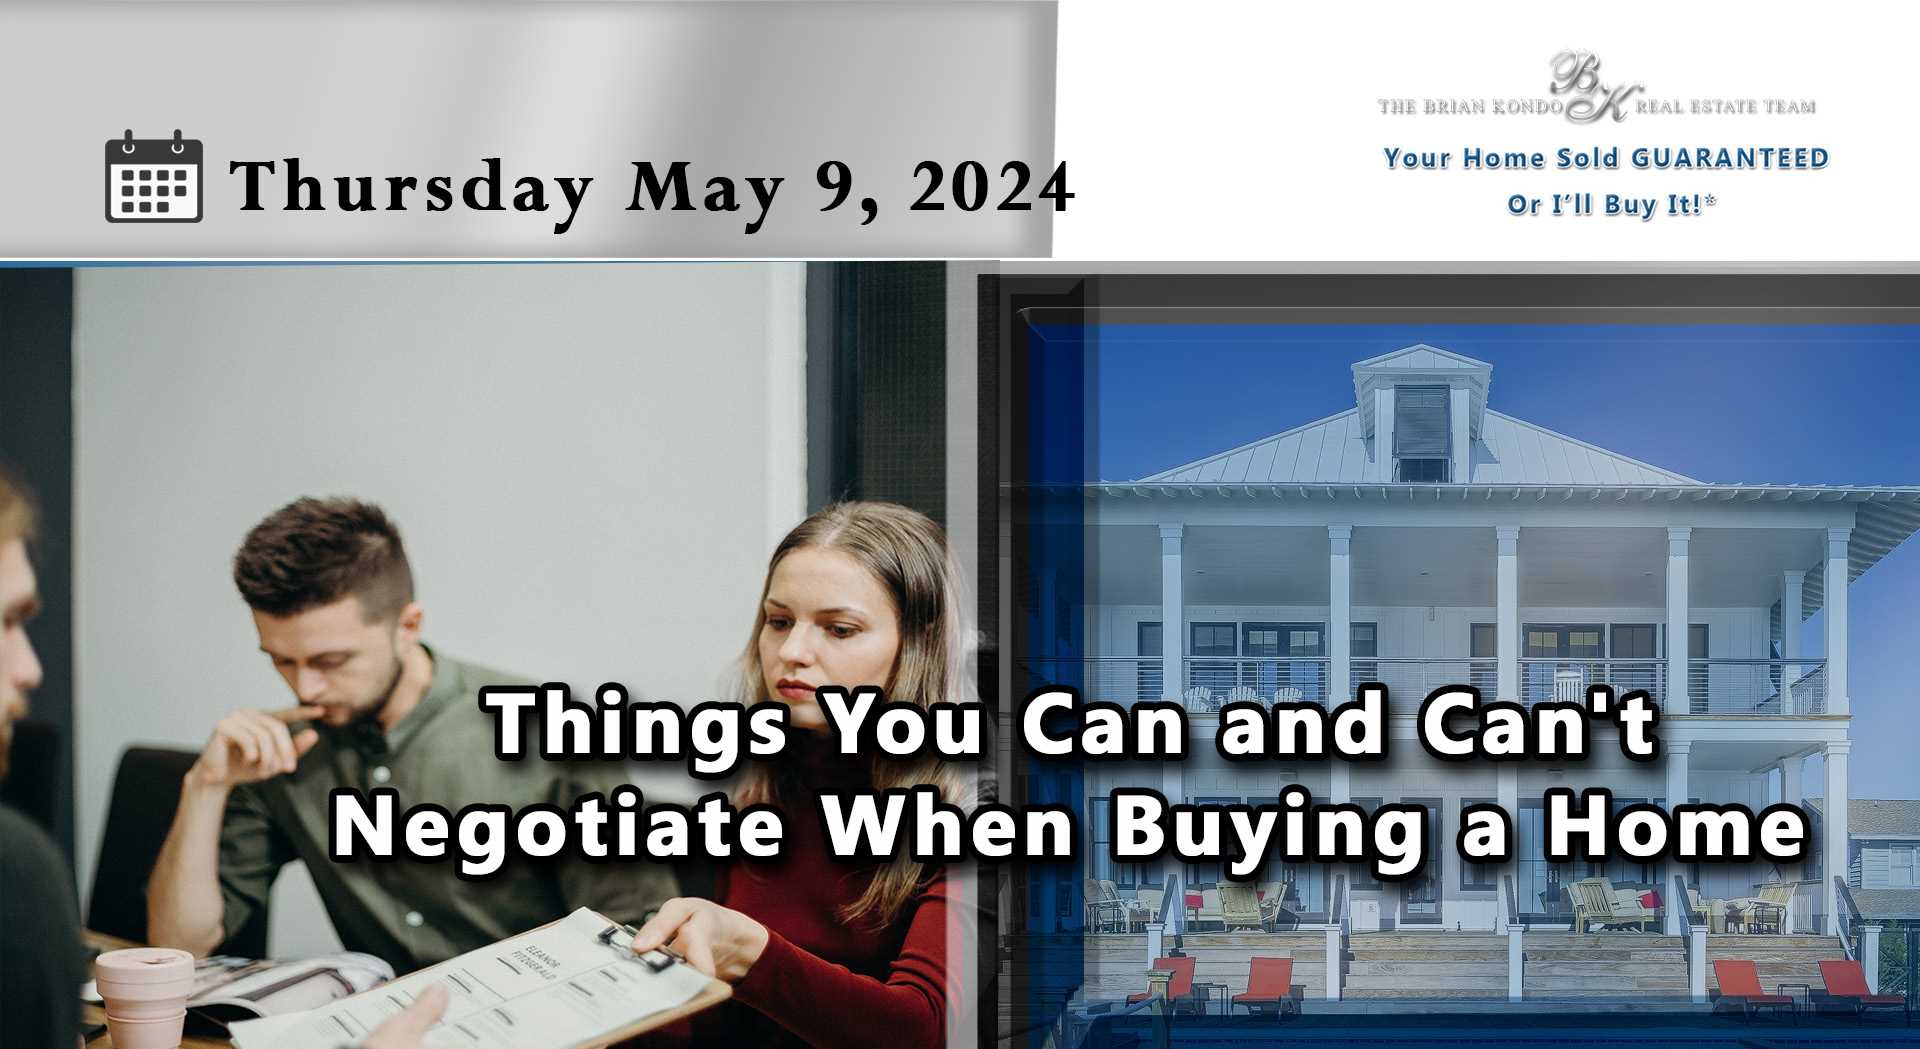 Things You Can and Can't Negotiate When Buying a Home